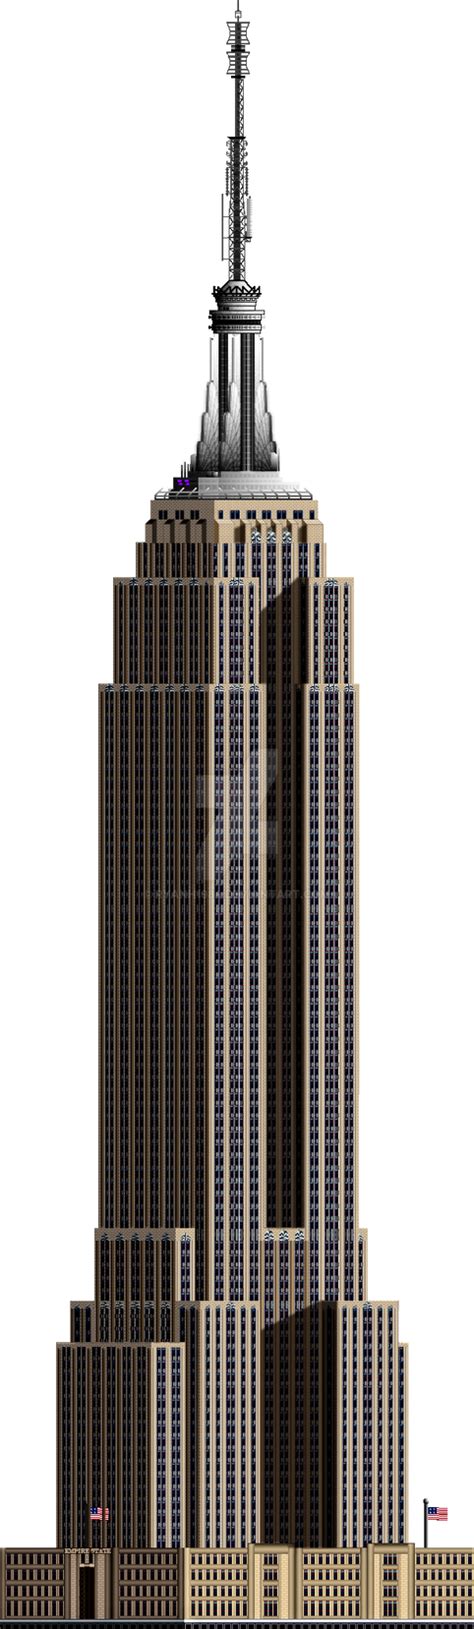 Empire State Building By Ryanh1984 On Deviantart